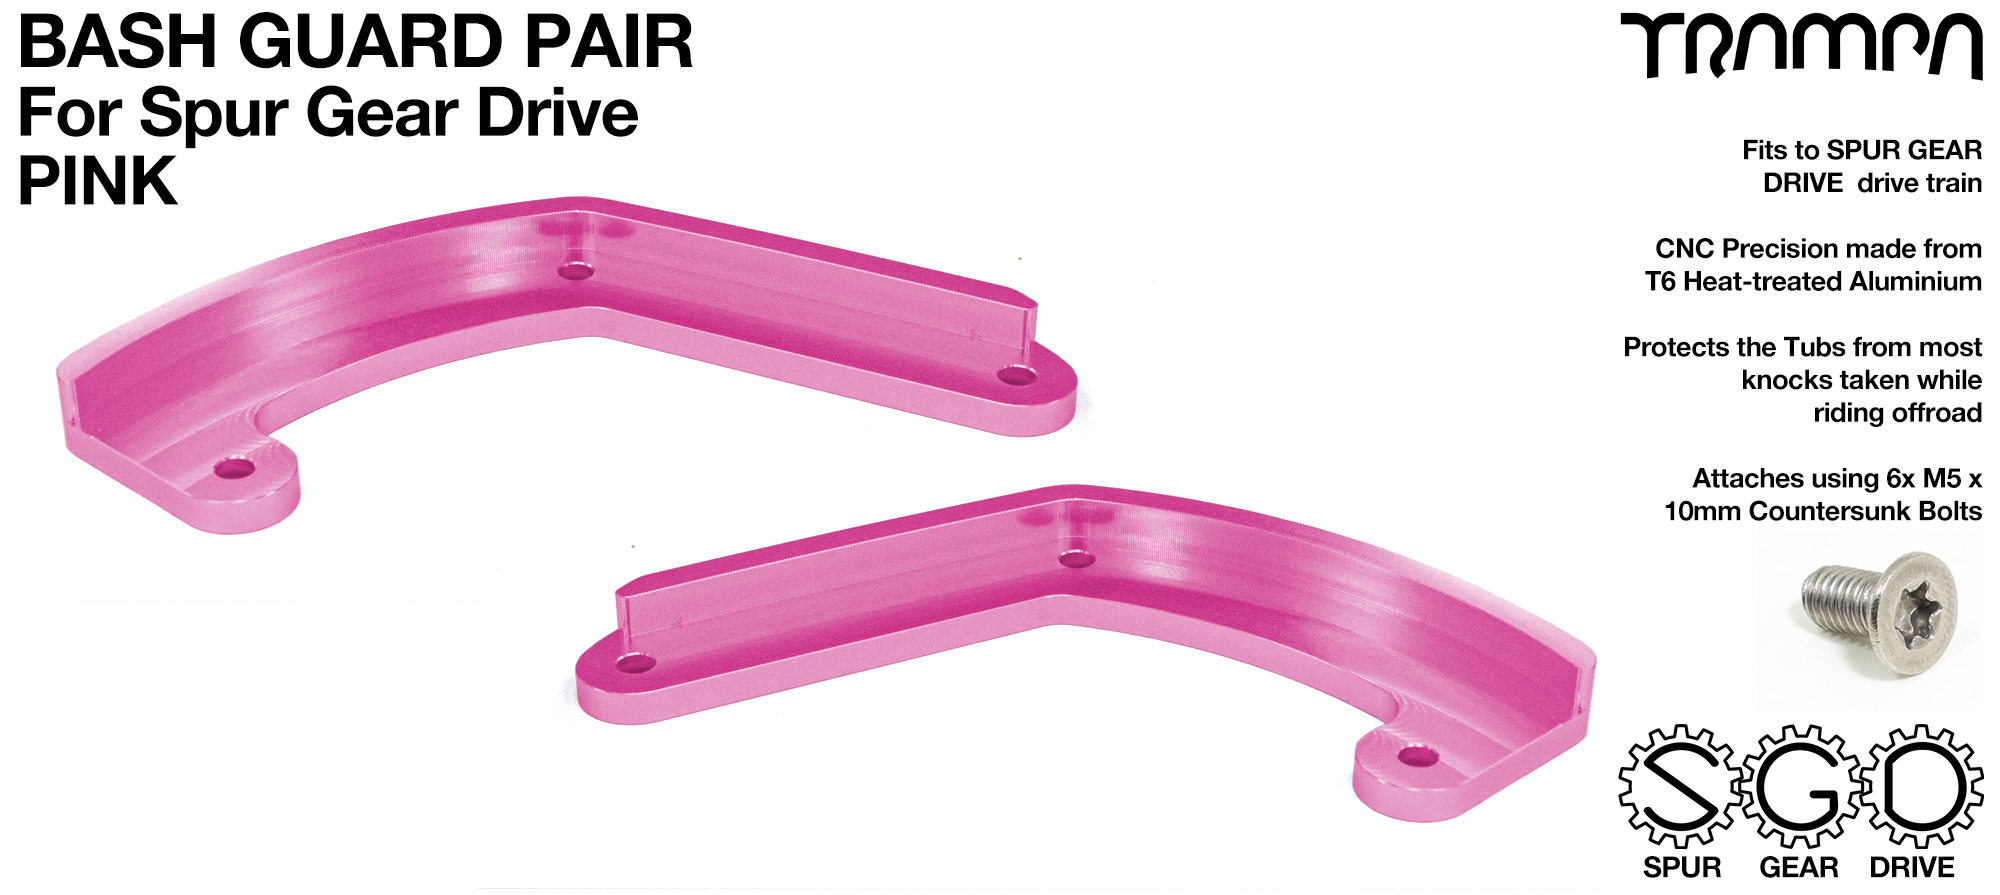  MkII Spur Gear Drive Bash Guards PAIR - PINK